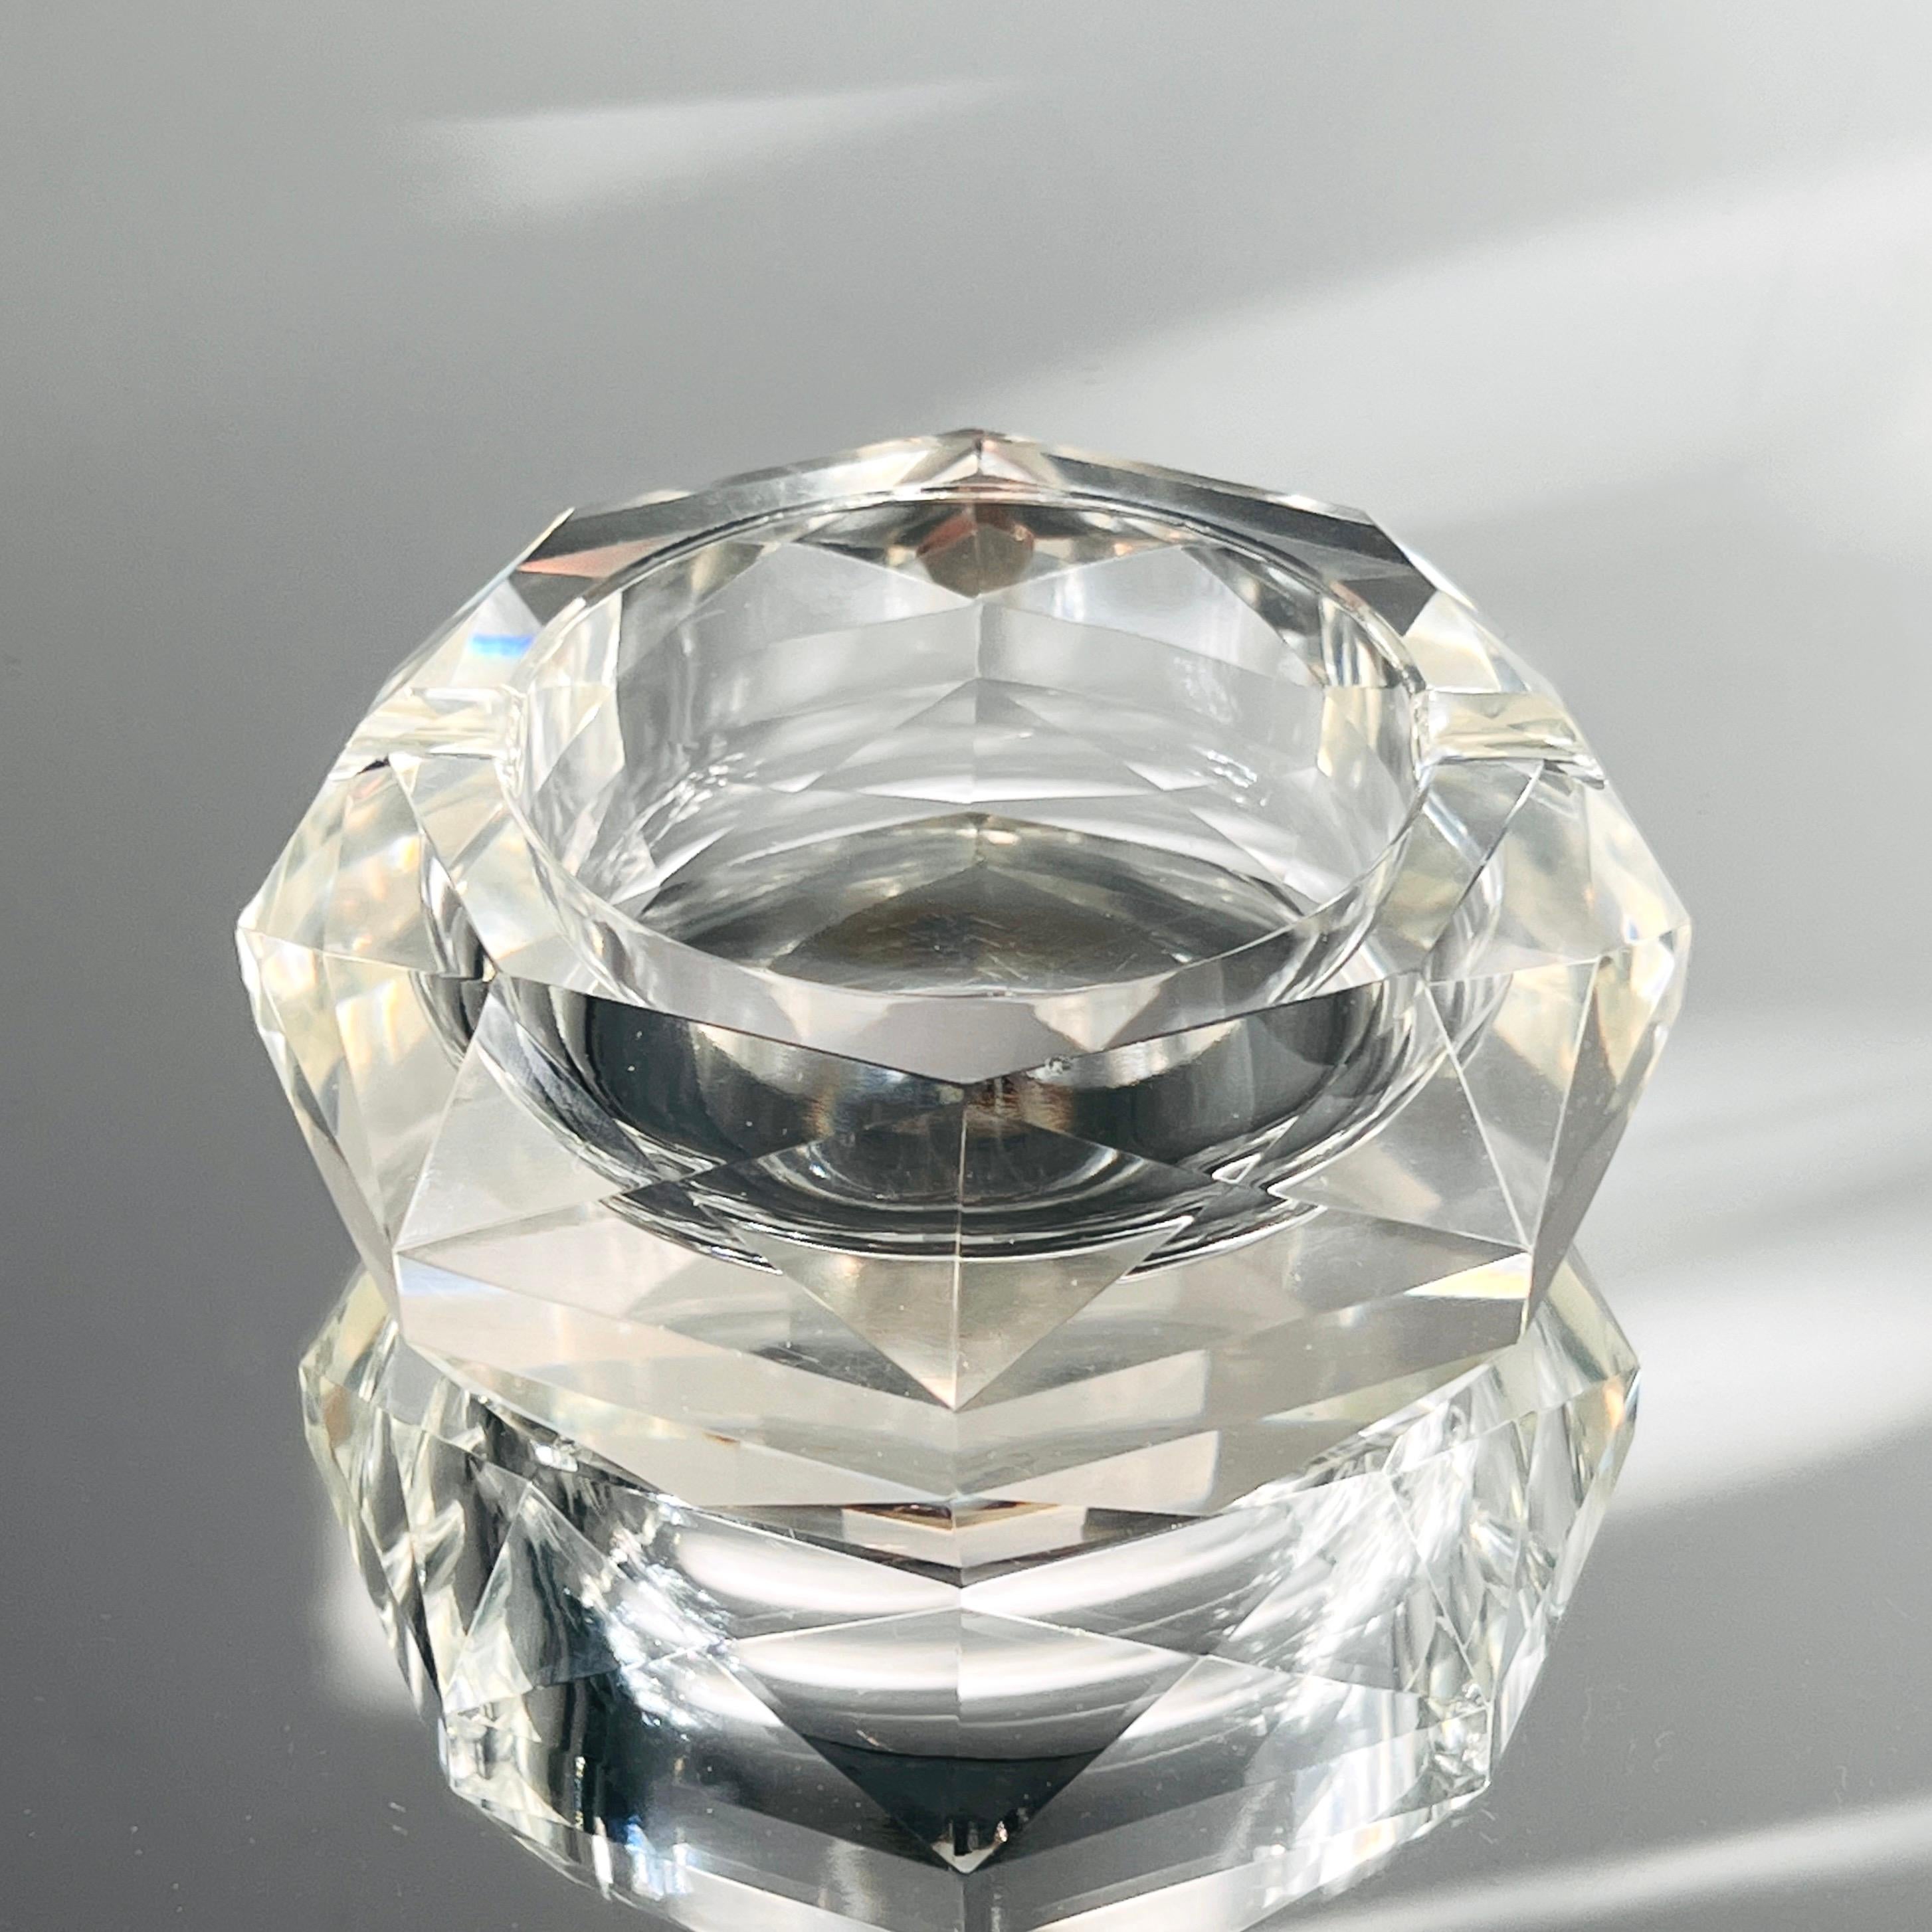 Beveled Faceted Crystal Ashtray with Diamond Prism Design, France, c. 1960s For Sale